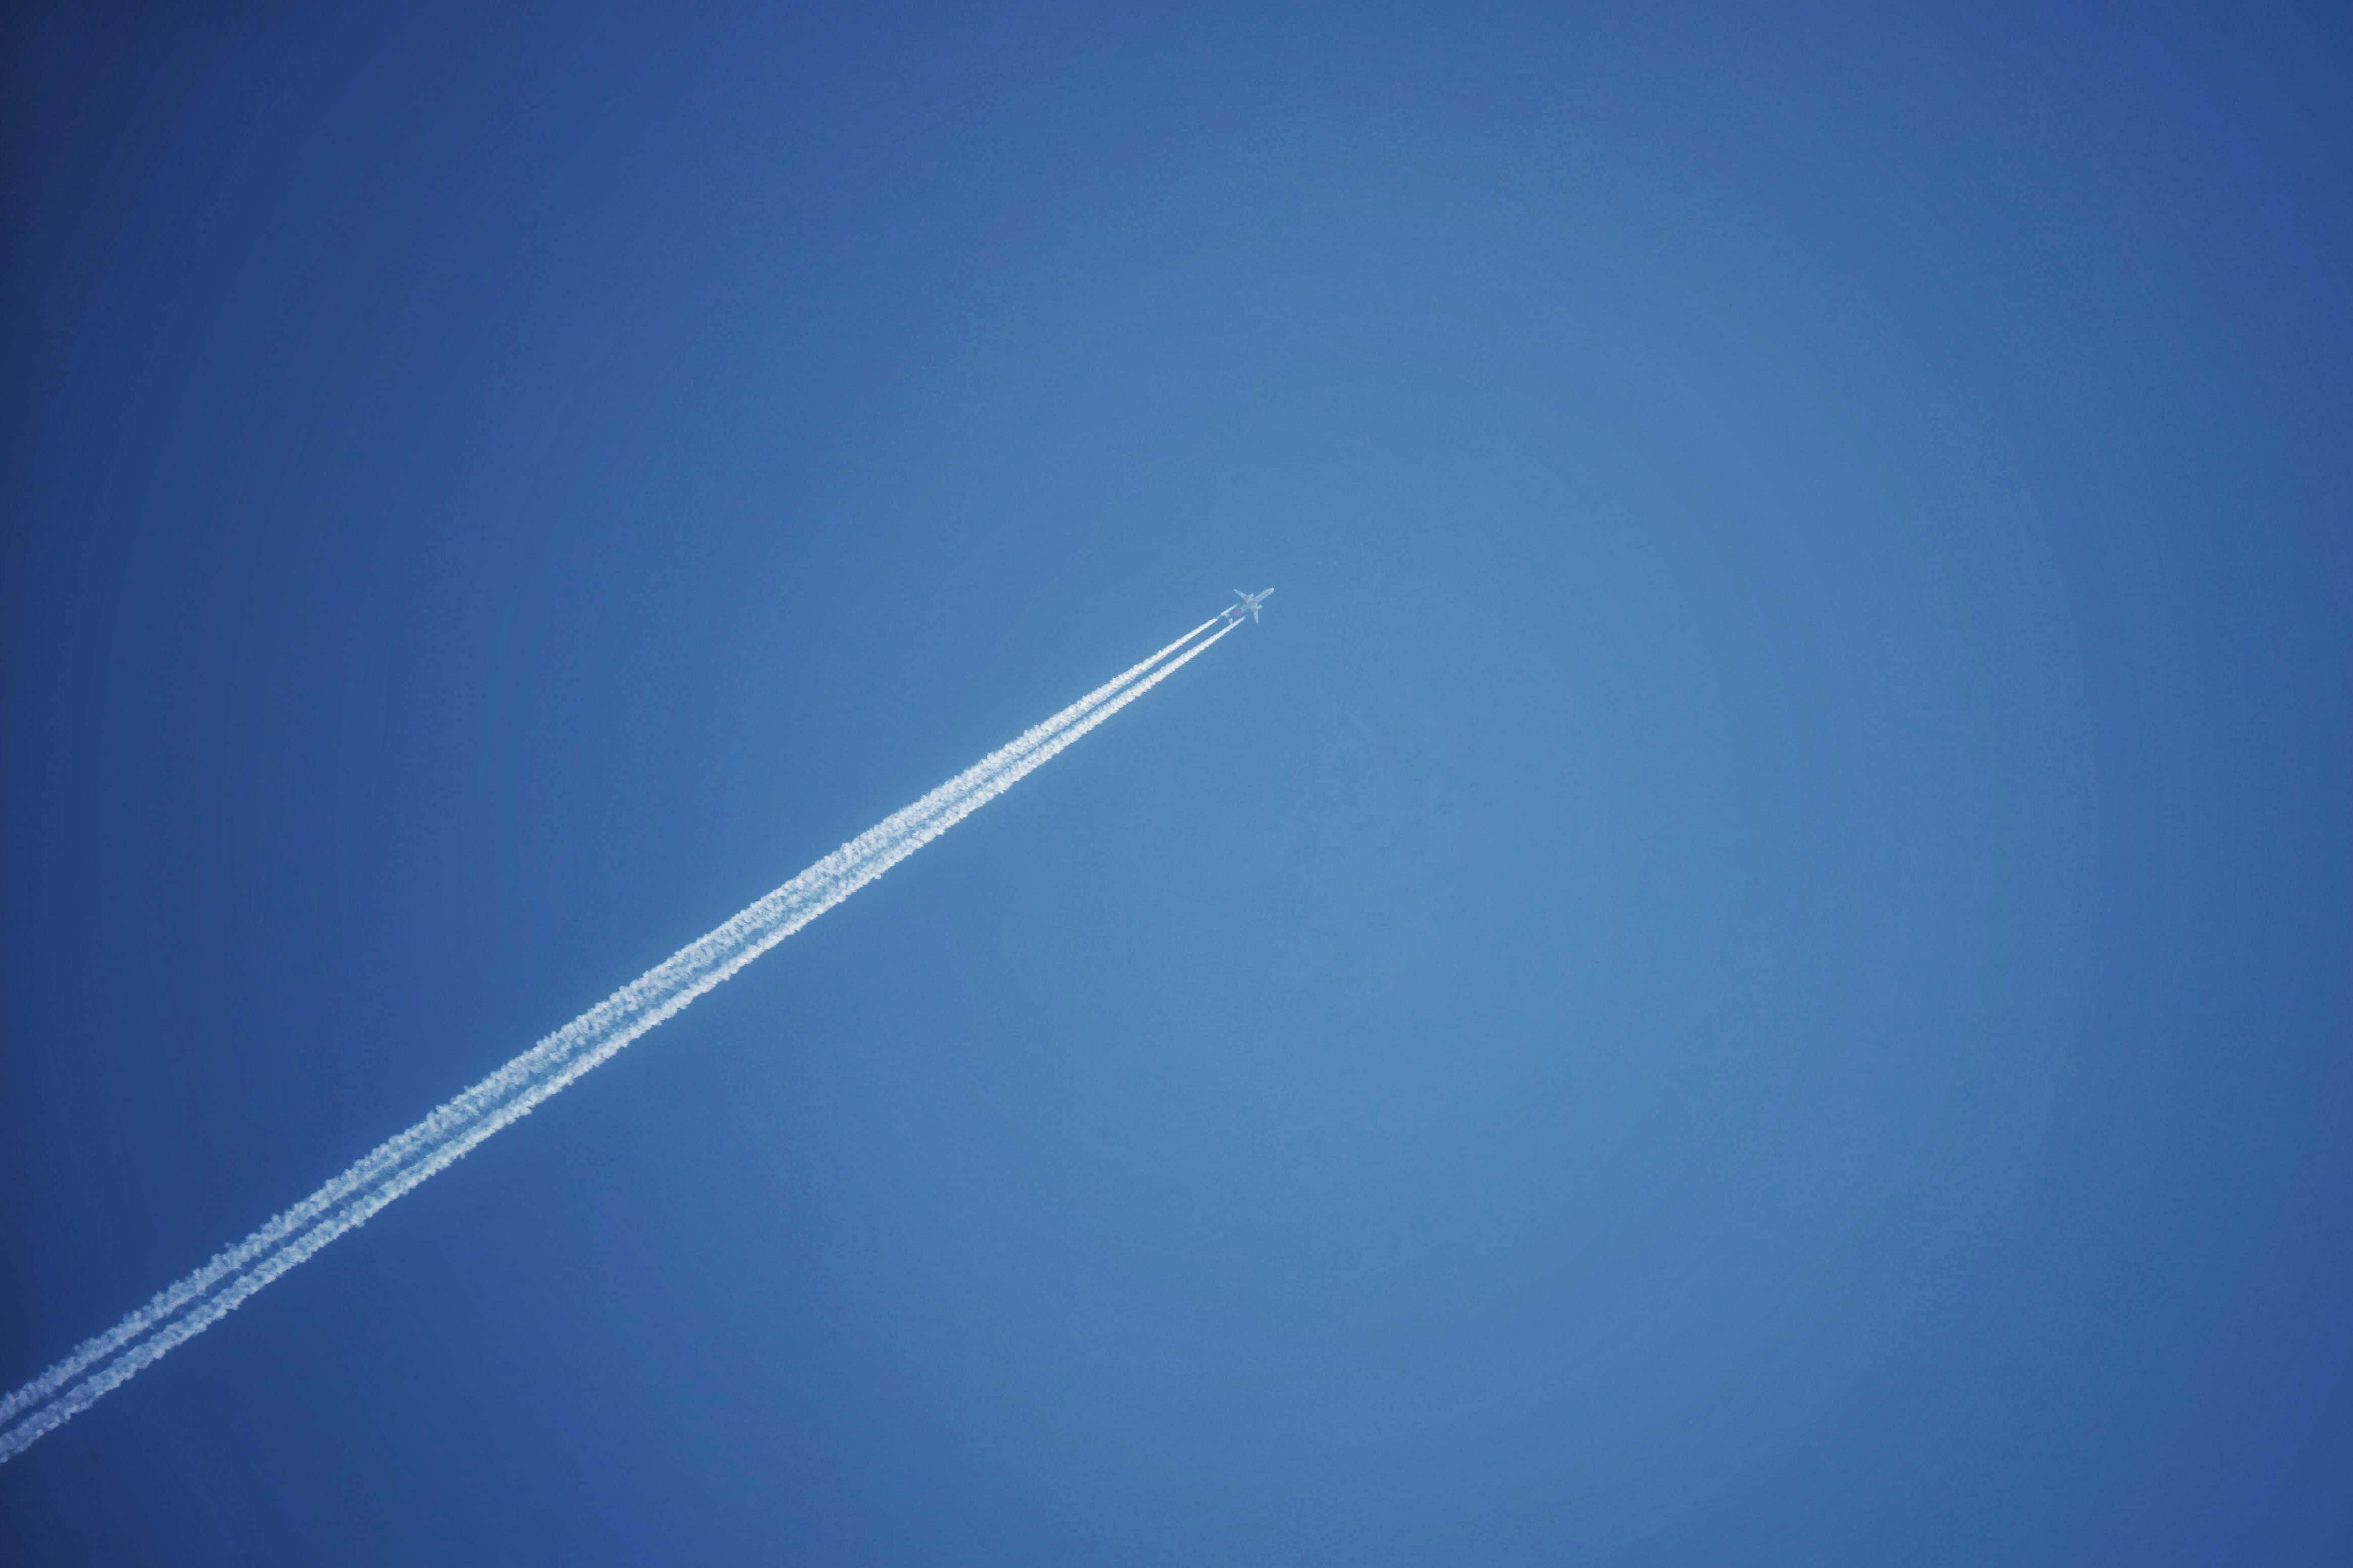 Nature Jet Plane In The Sky During Daytime Sky Image Free Photo